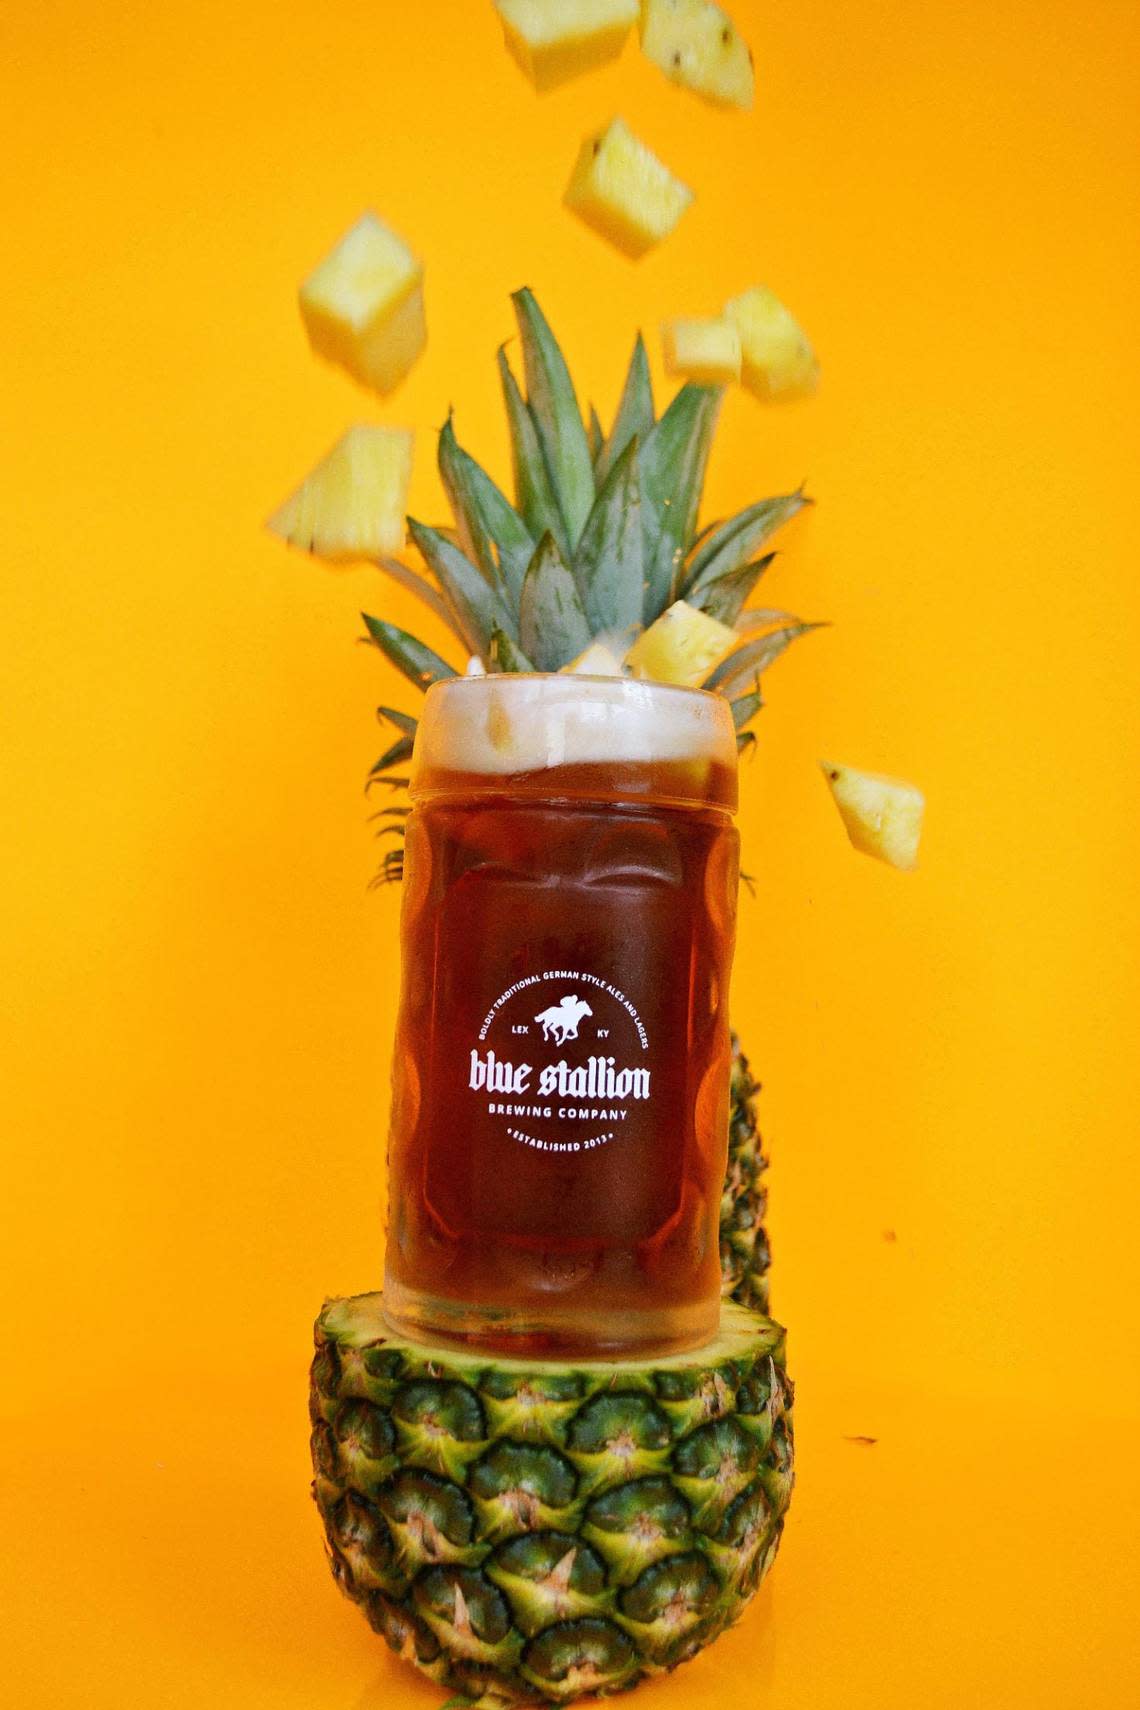 Blue Stallion Brewing will bring back their pineapple beer for their annual Oktoberfest festival. It’s lightly sweet with the comforting touch of cinnamon.